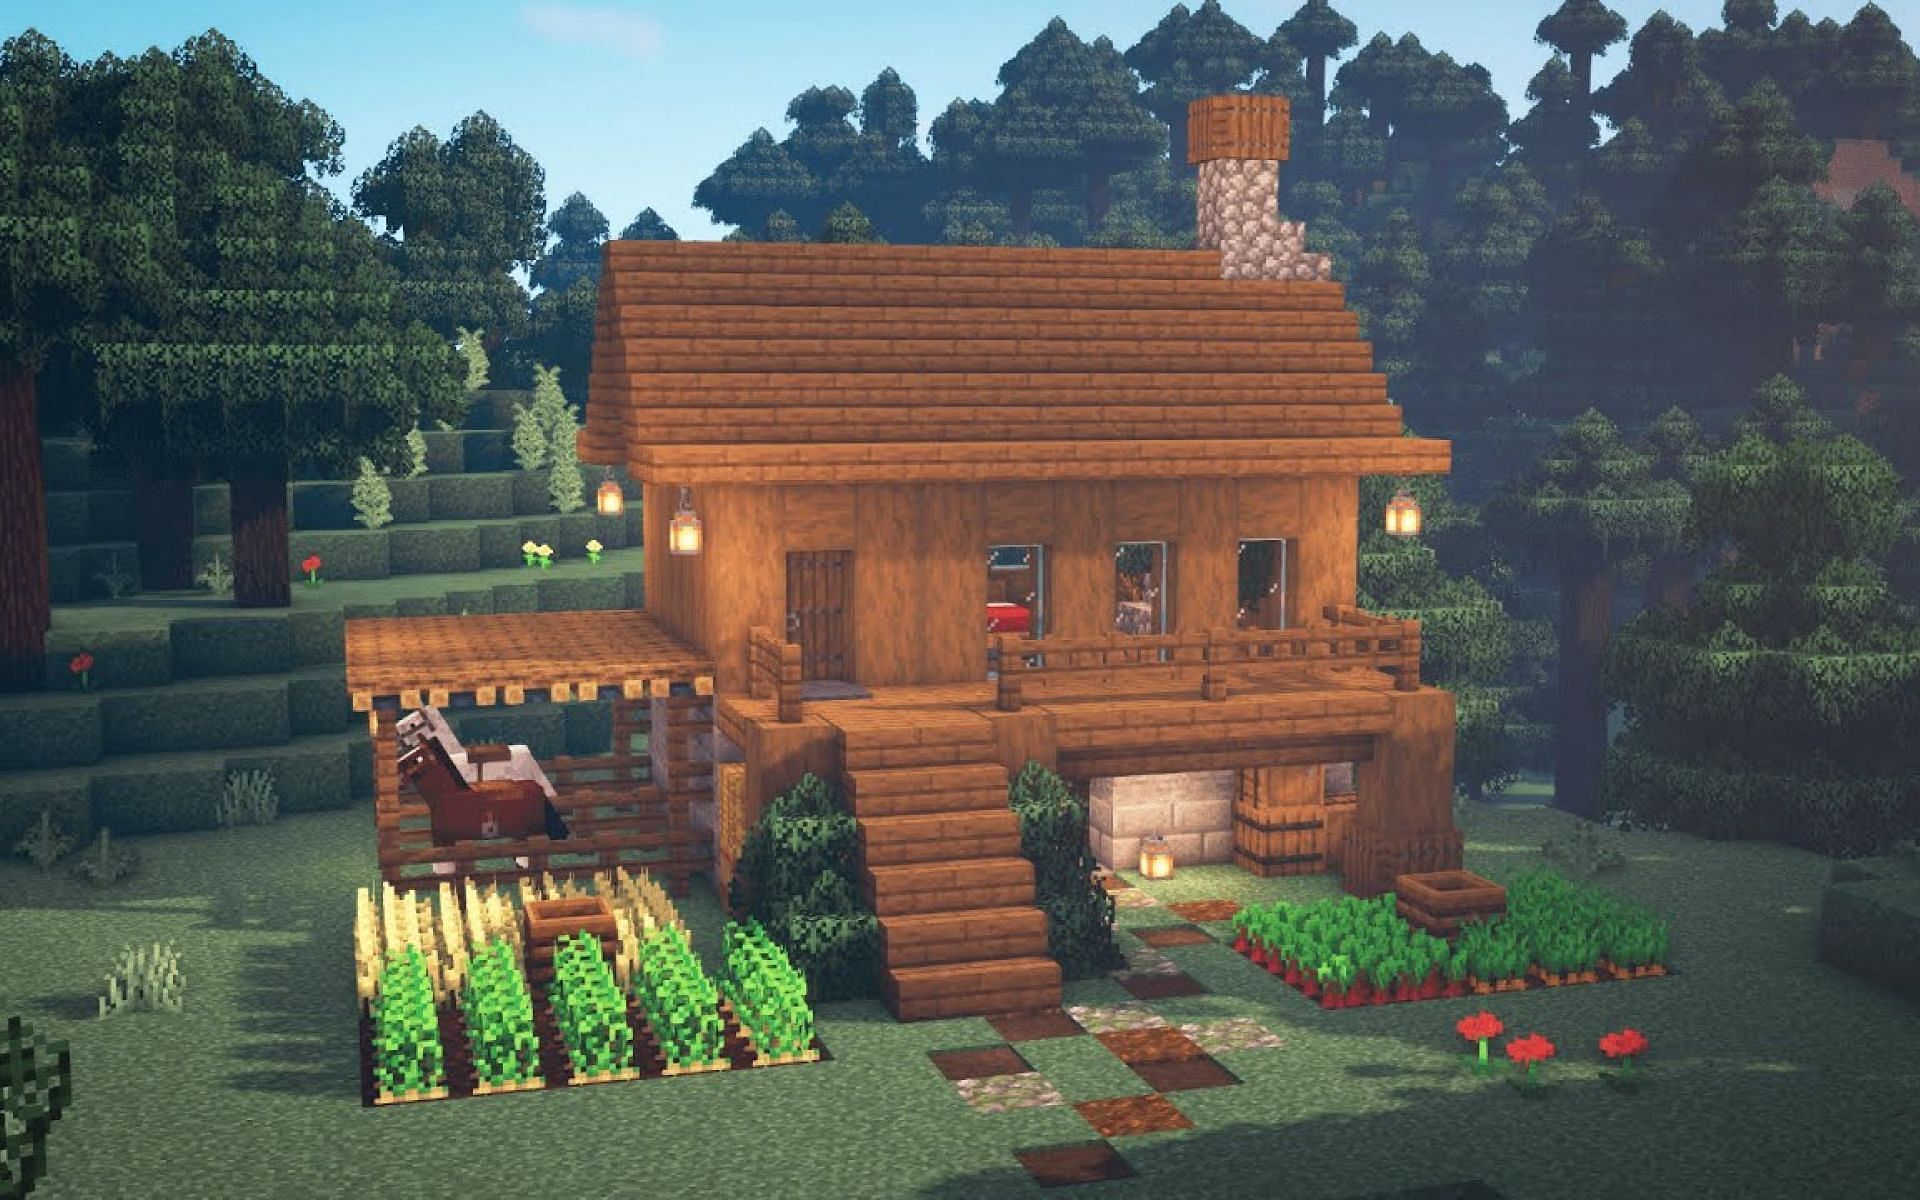 Building a starter house is an important step in many Minecraft games. Image via Zaypixel.